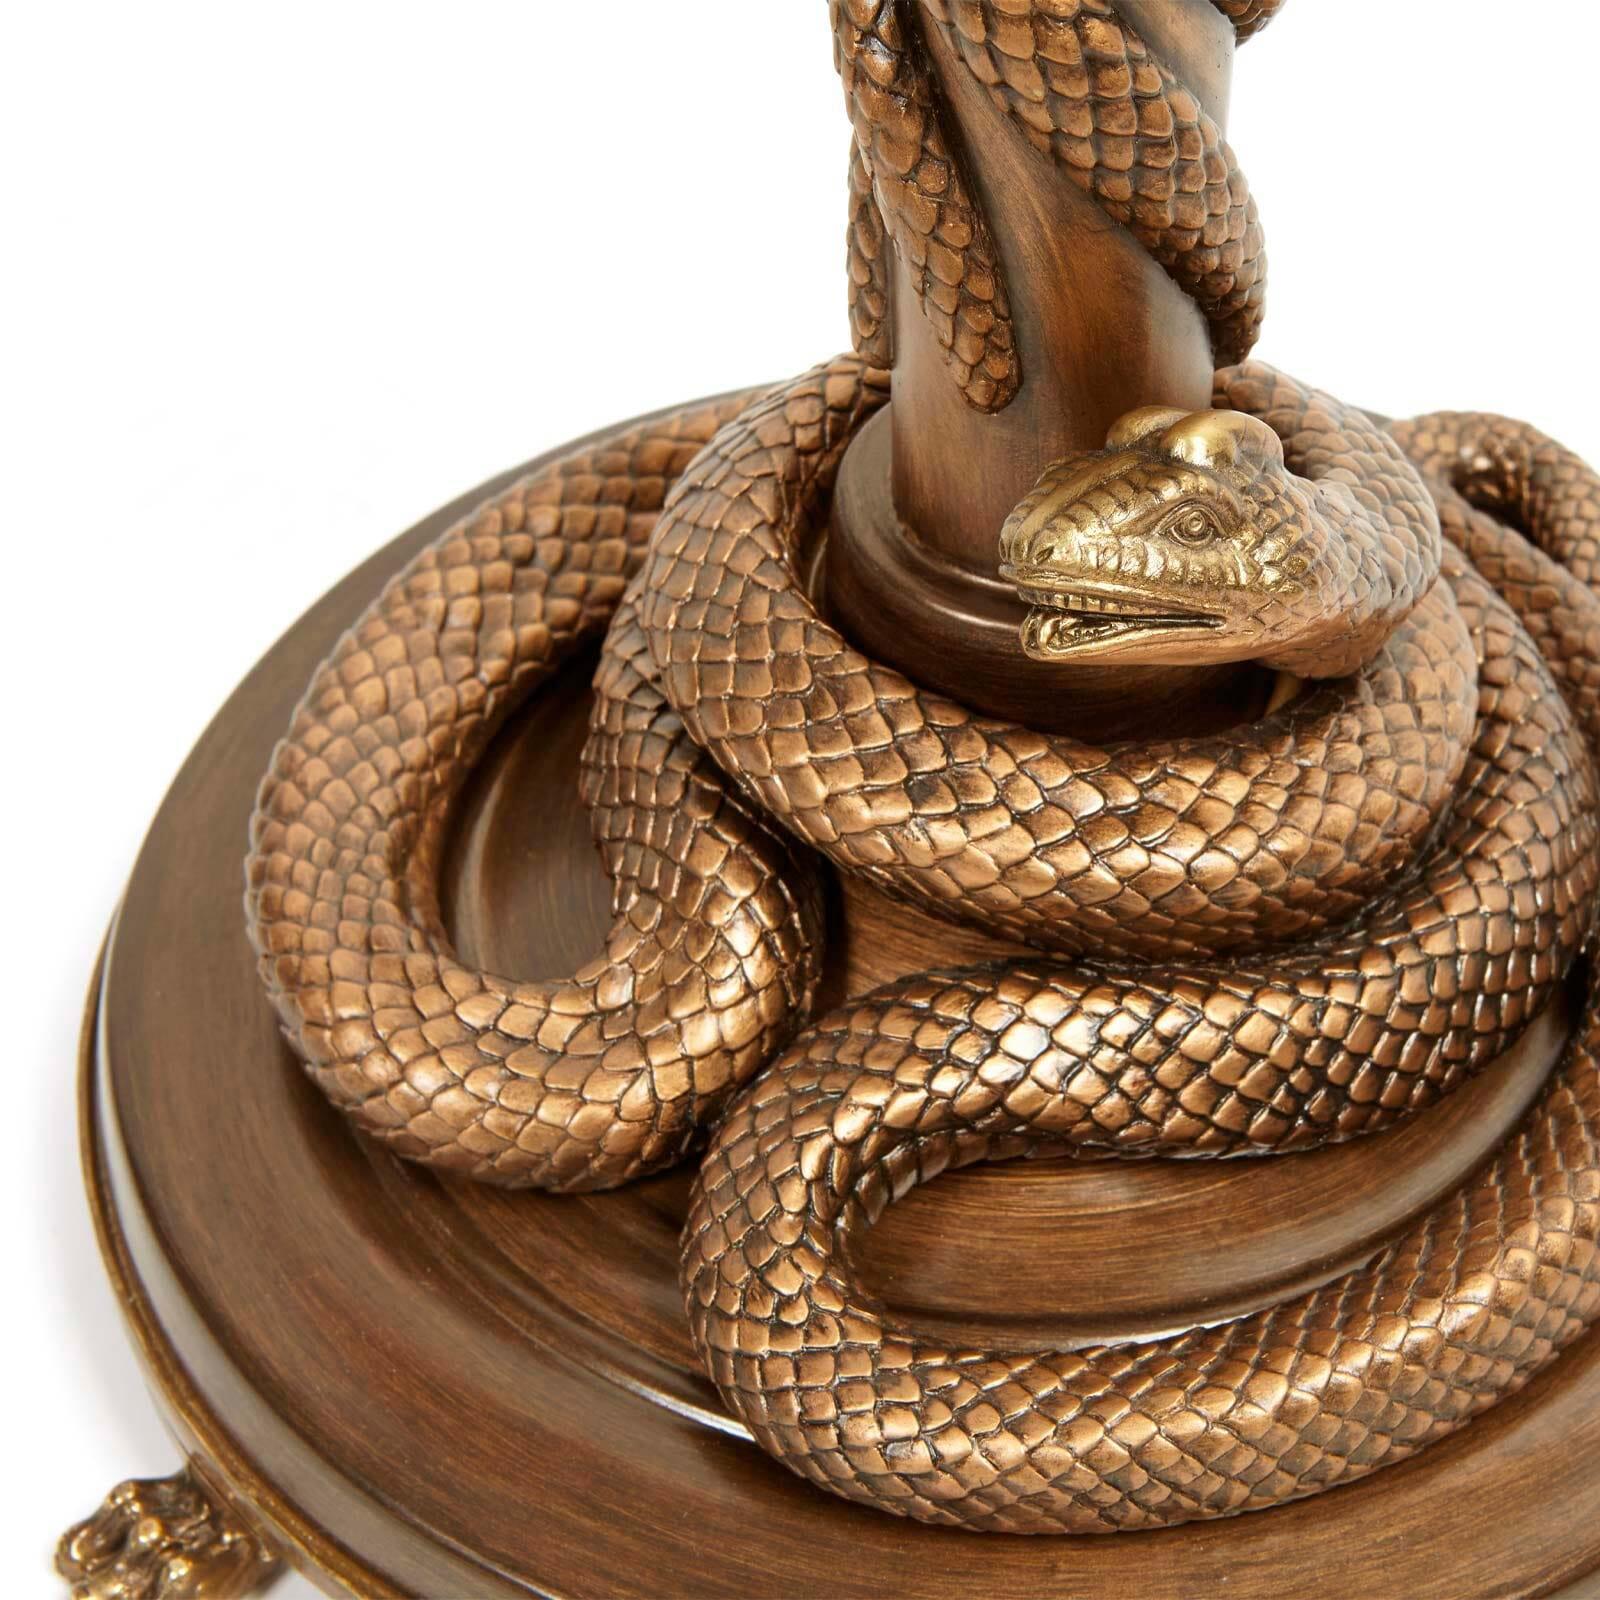 Placing a spotlight on the dark side of nature, the SERPENTIS lampstand is subversive in its beauty. Enwrapped by snakes House of Hackney's symbol of immortality around the base and all the way to the top, this decadent design is crafted in ceramic